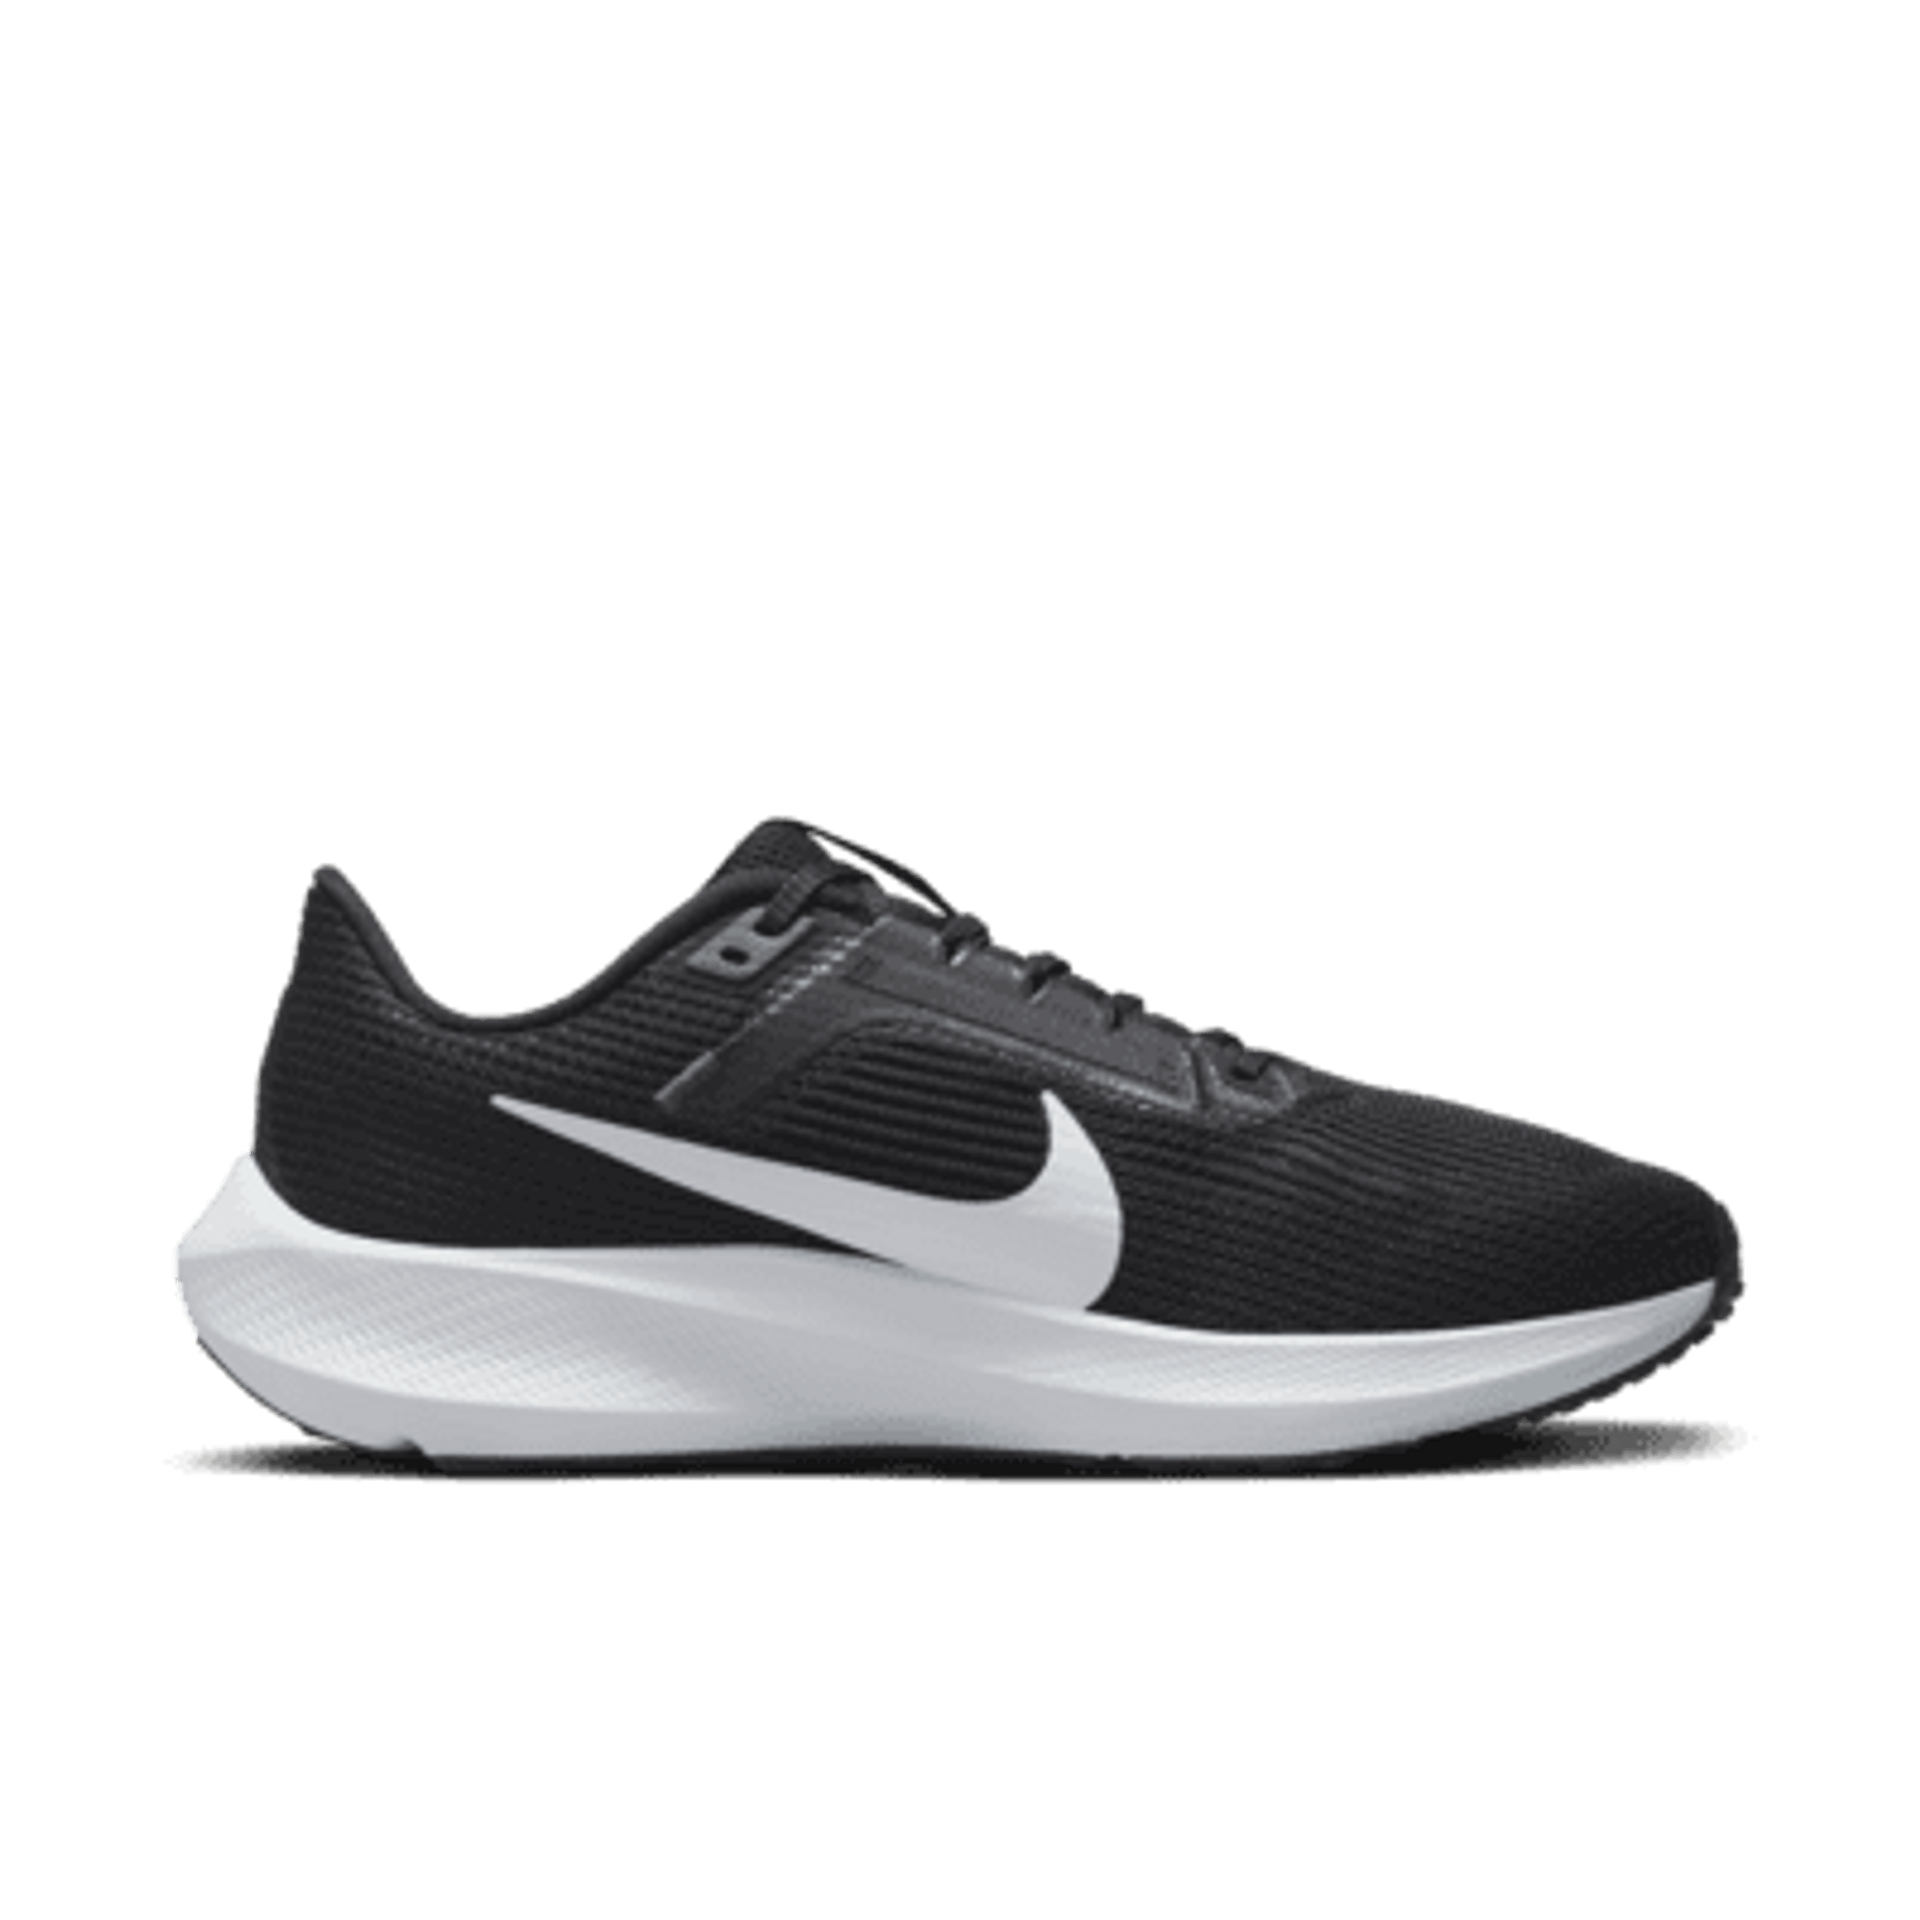 Nike Authorized Licensee | Athlete Performance Solutions